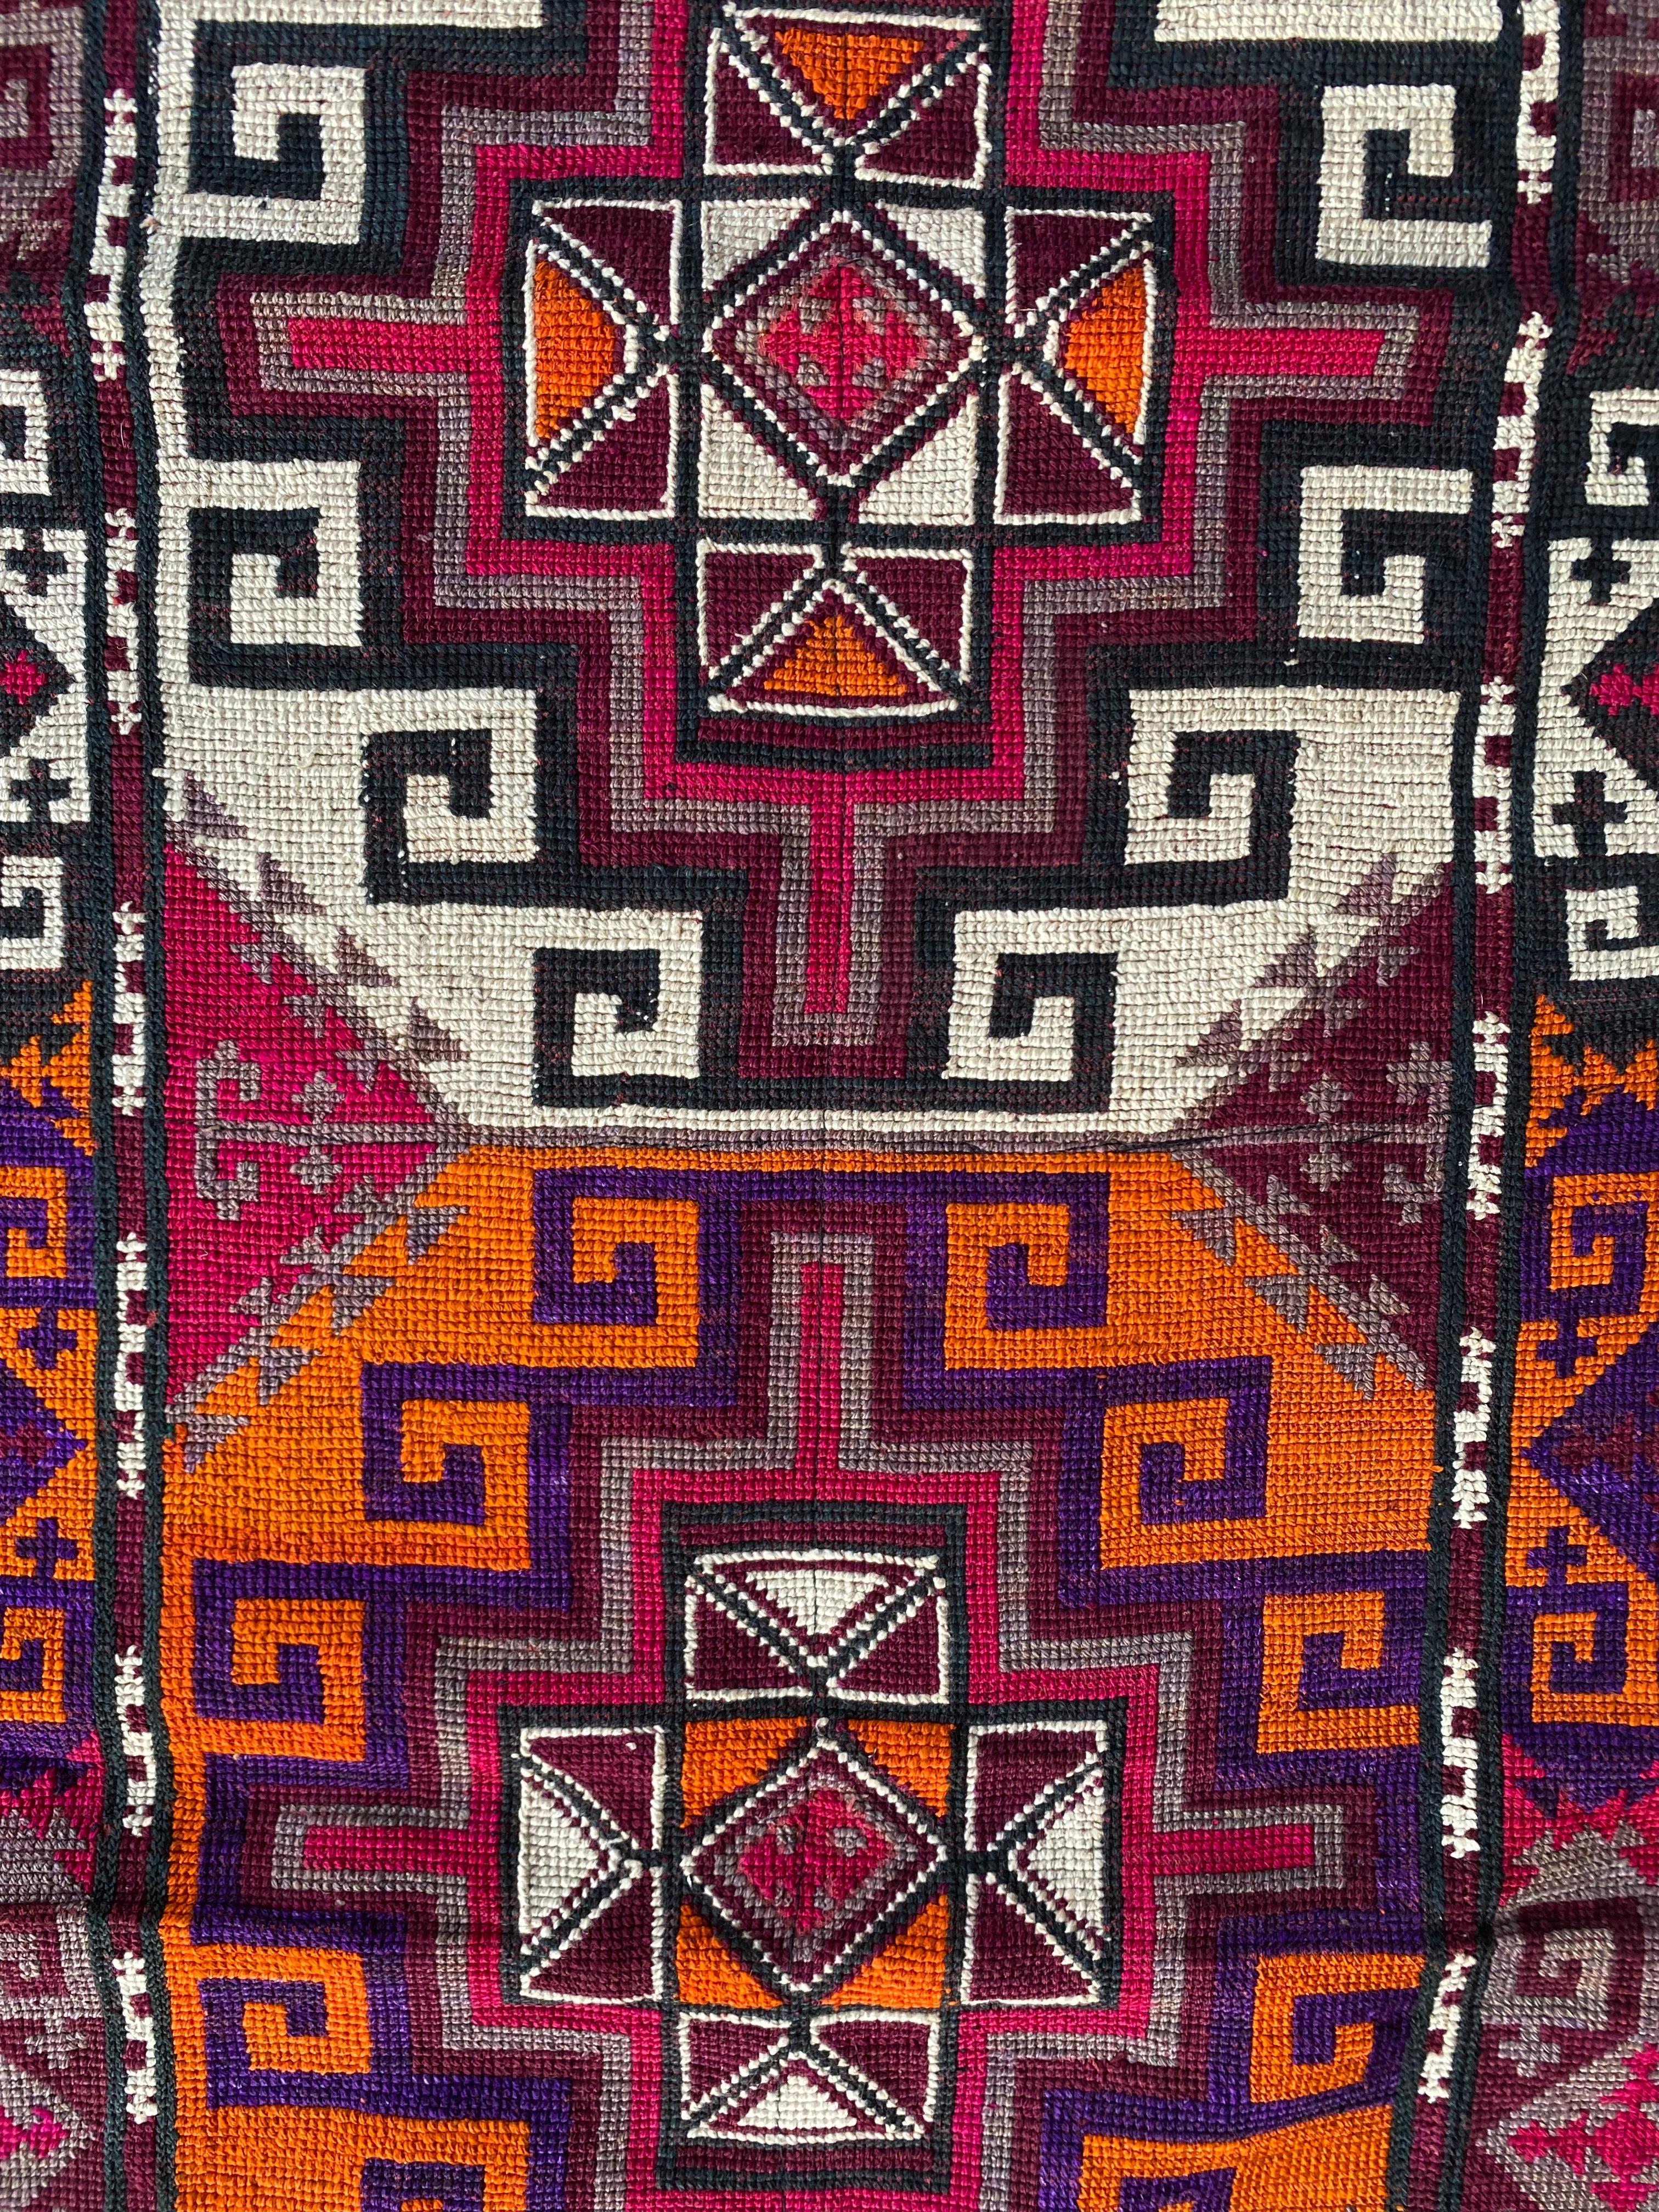 Central Asian Embroidered Textile, “Suzani”, Mid 20th Century  For Sale 4